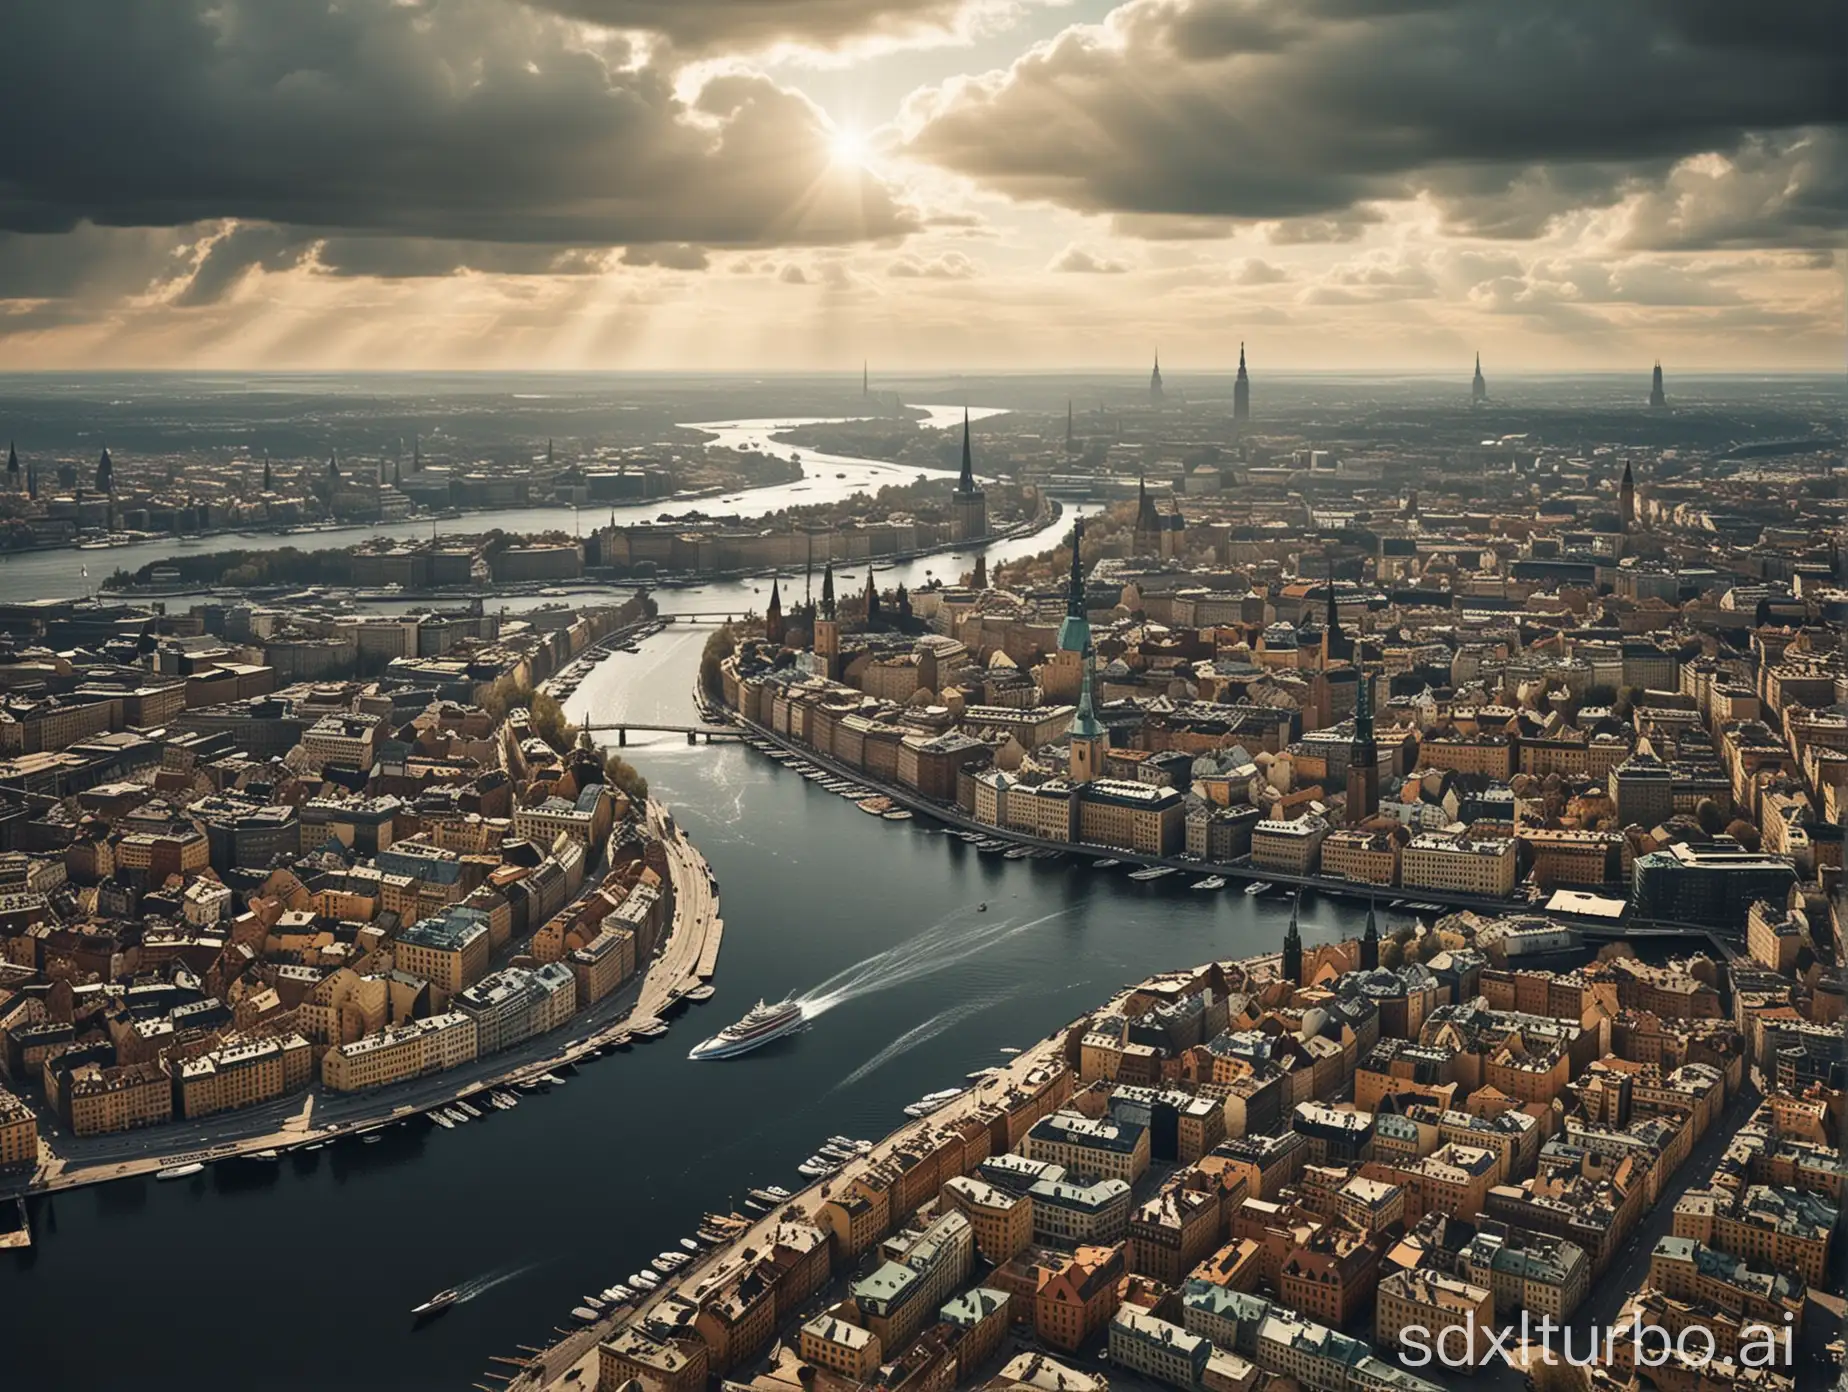 Futuristic-Vision-of-Stockholm-in-2300-Advanced-Cityscape-with-Flying-Vehicles